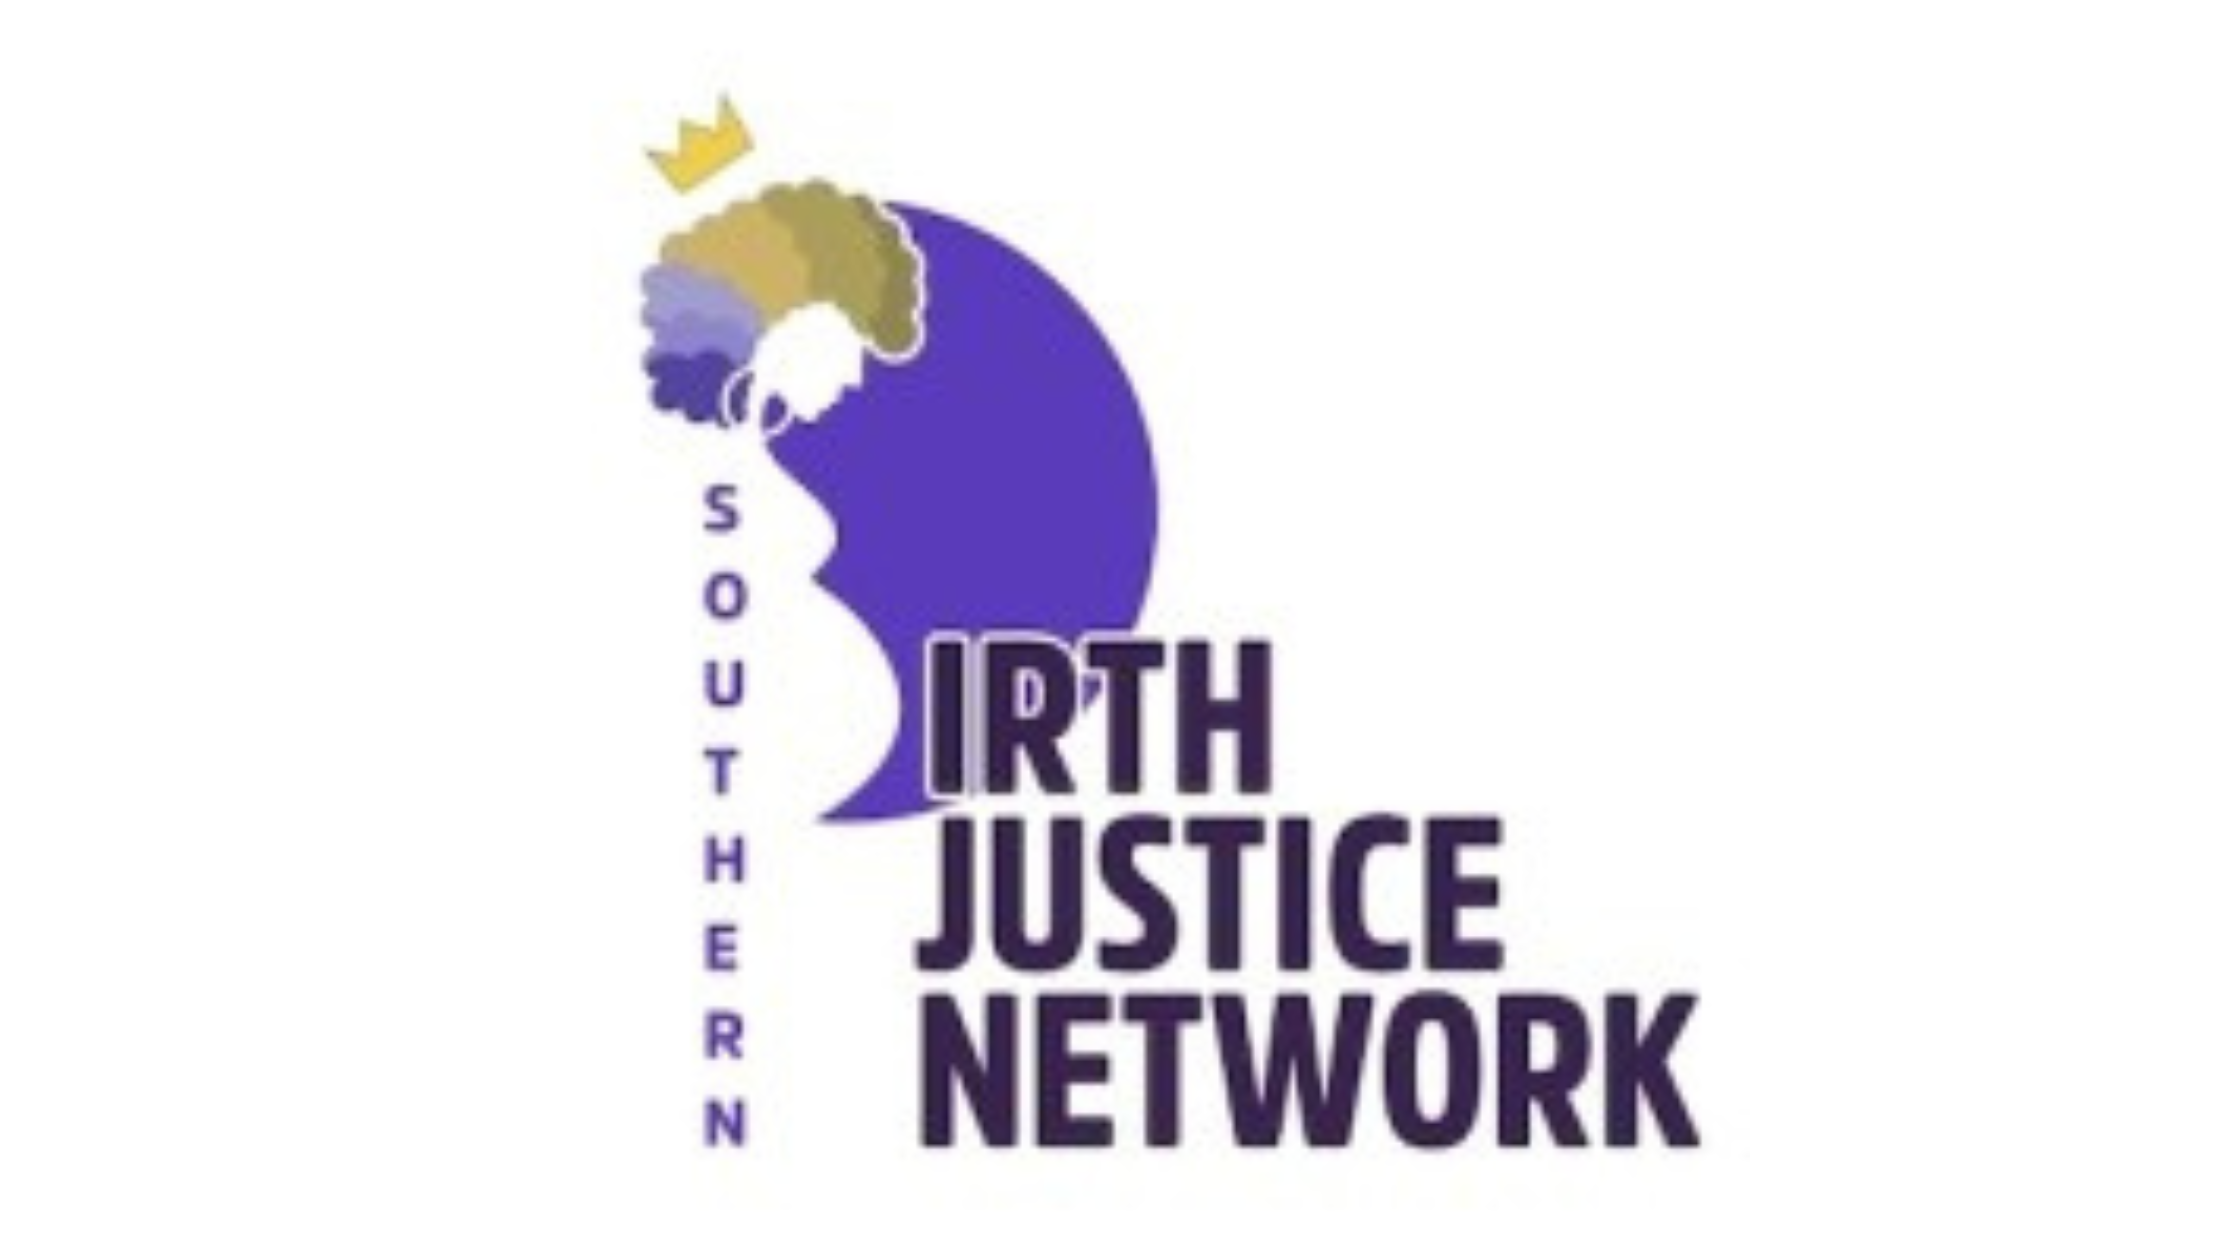 Southern Birth Justice Network